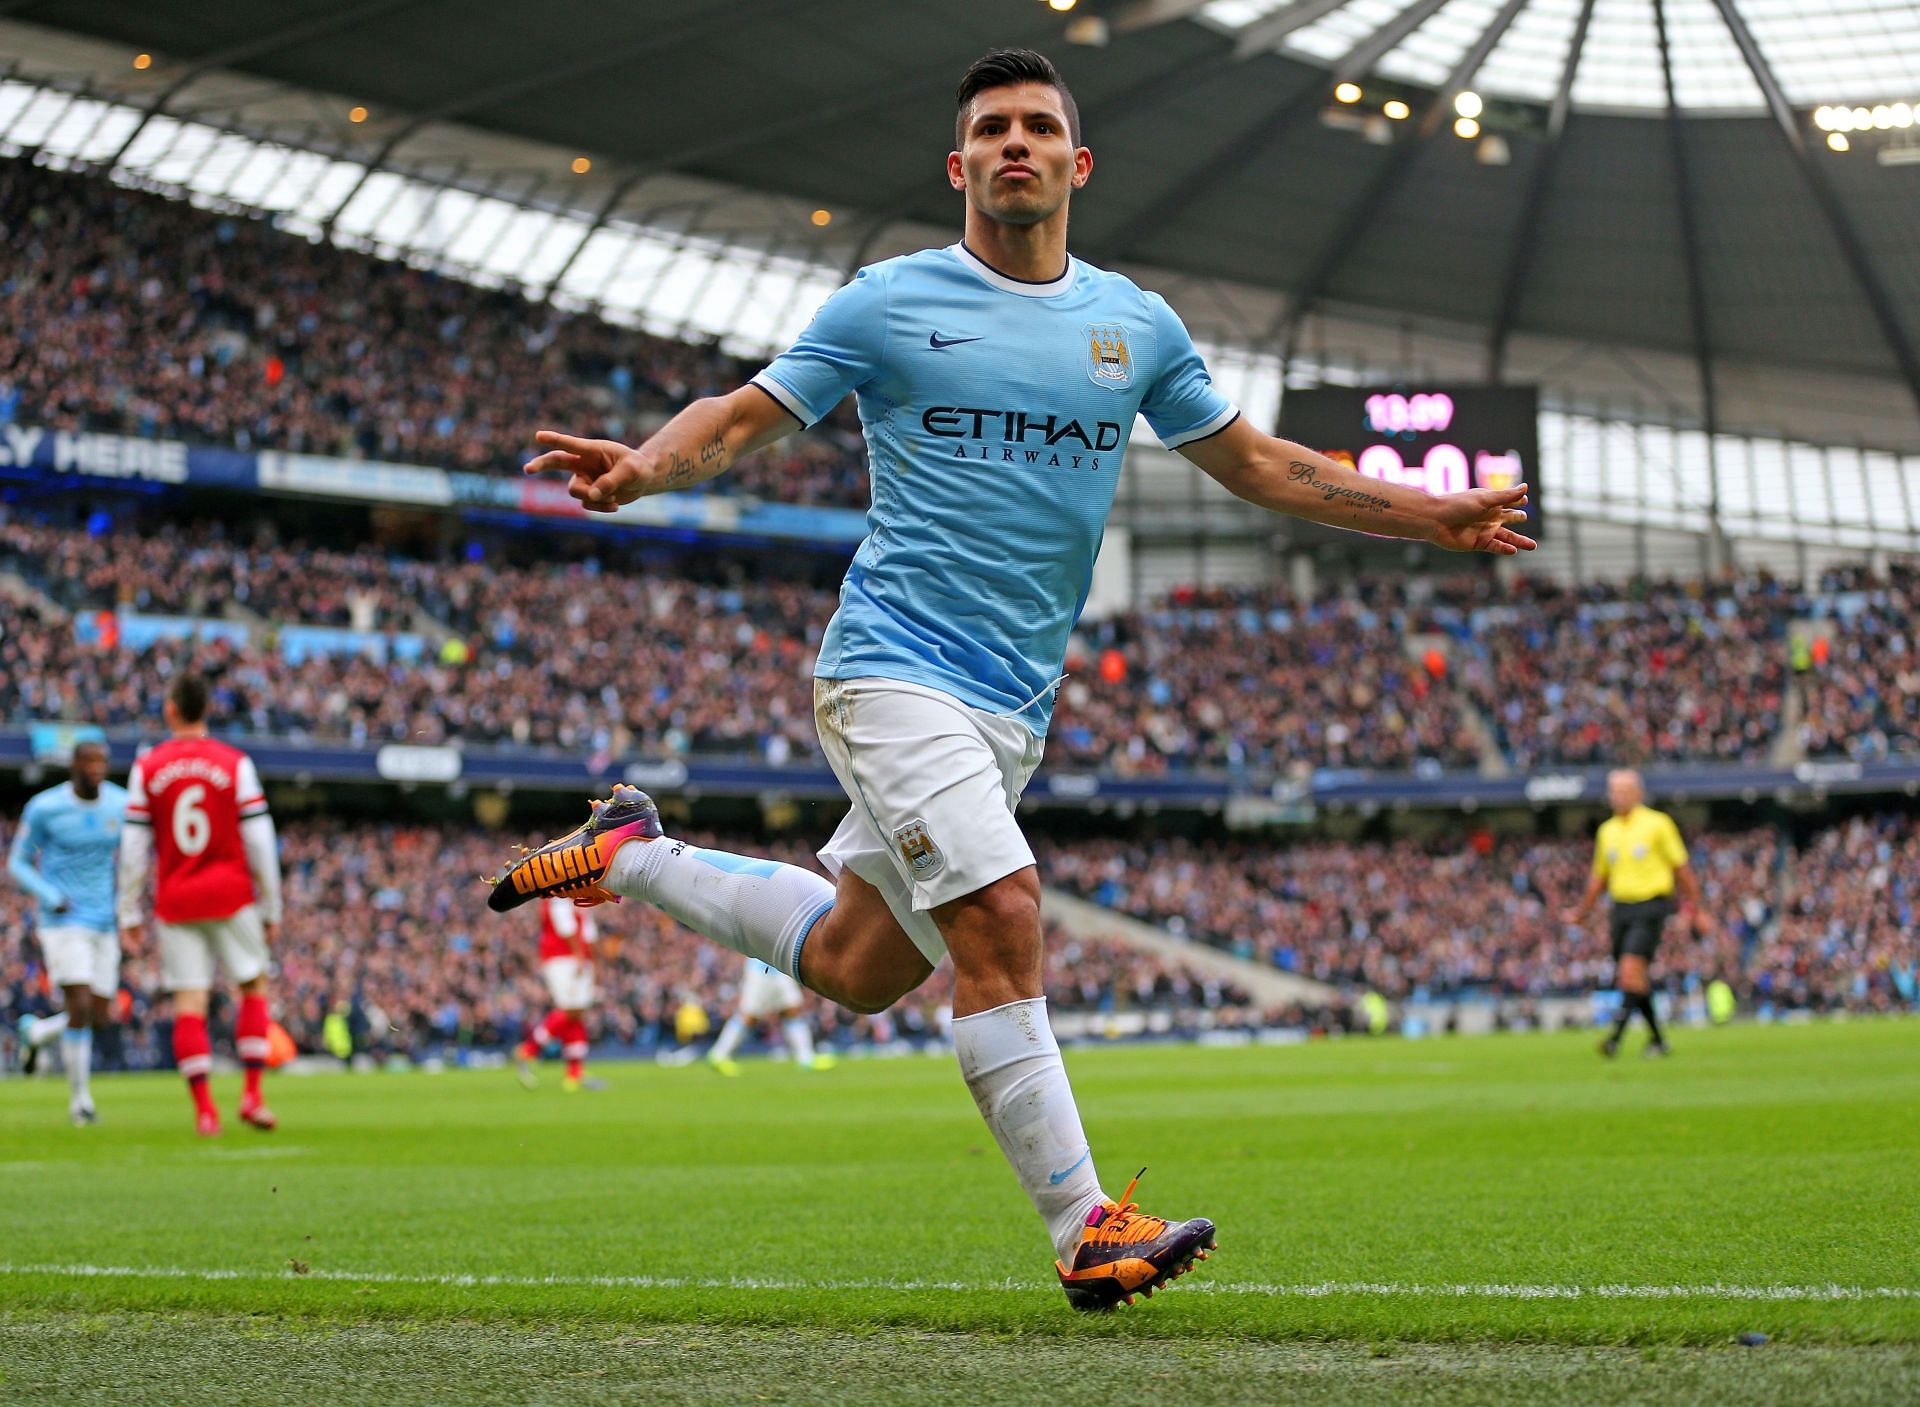 Sergio Aguero and Cristiano Ronaldo could not compete against one another in England